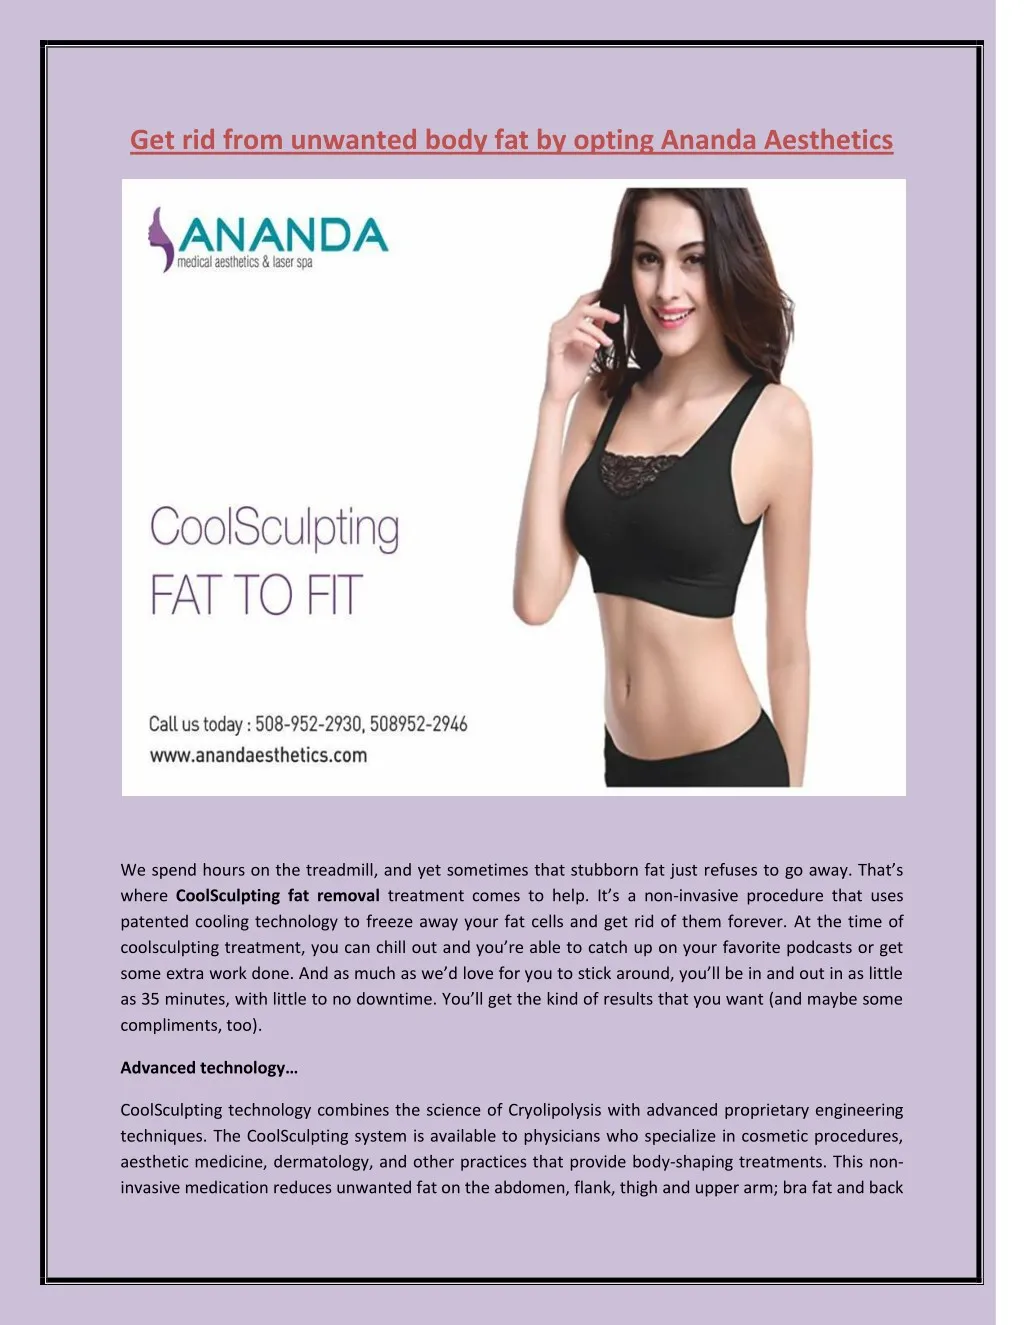 get rid from unwanted body fat by opting ananda